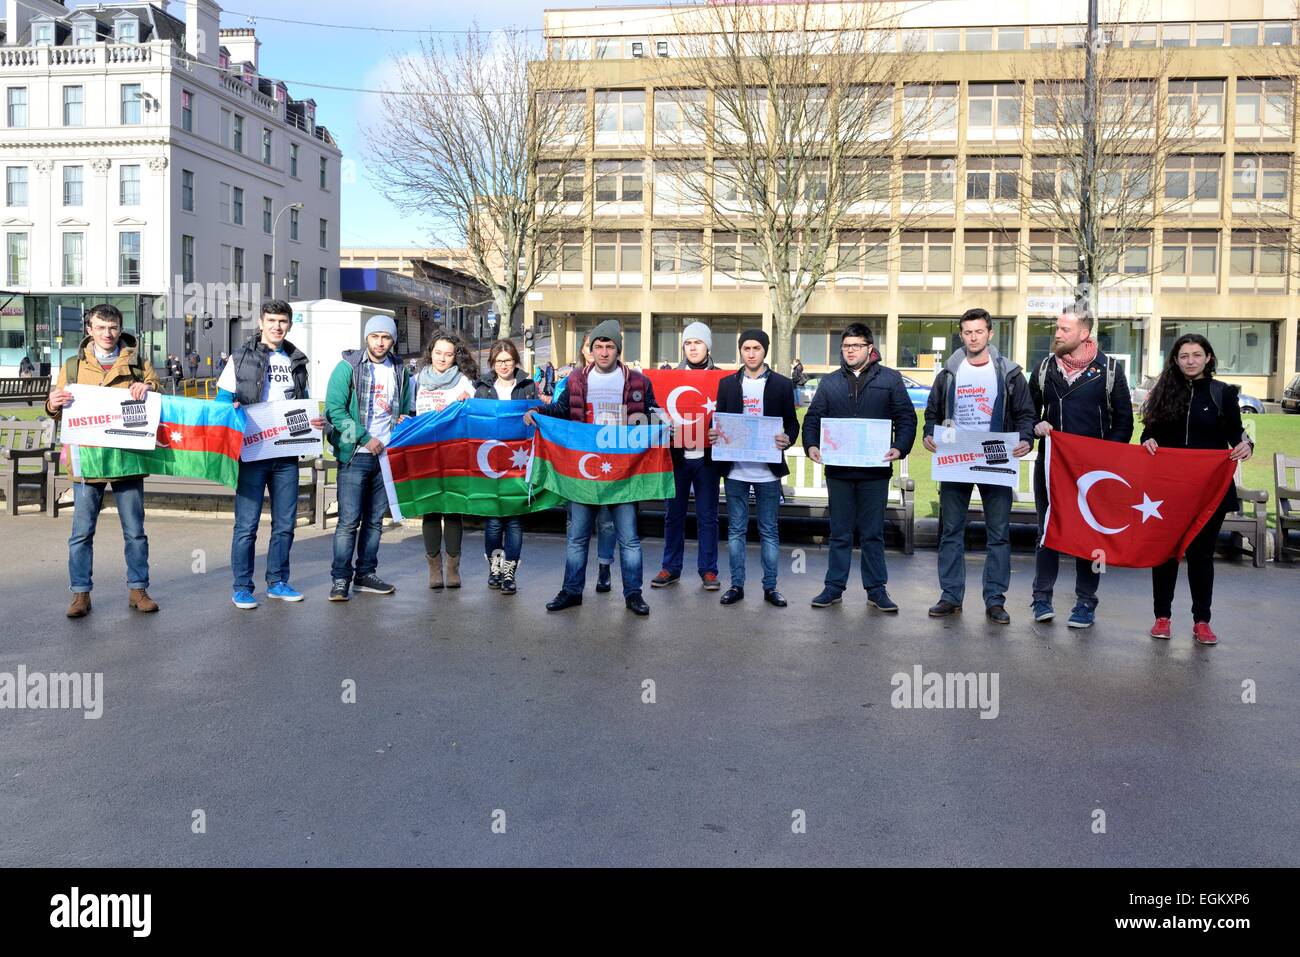 George Square, Glasgow, Scotland, UK. 26th February, 2015. National awareness campaign justice for Khojaly. These young men and women met in Glasgow city centre to bring awareness to what they describe as the first cold war genocide which took place during 1992 in Khojaly, Azerbaijan. Stock Photo